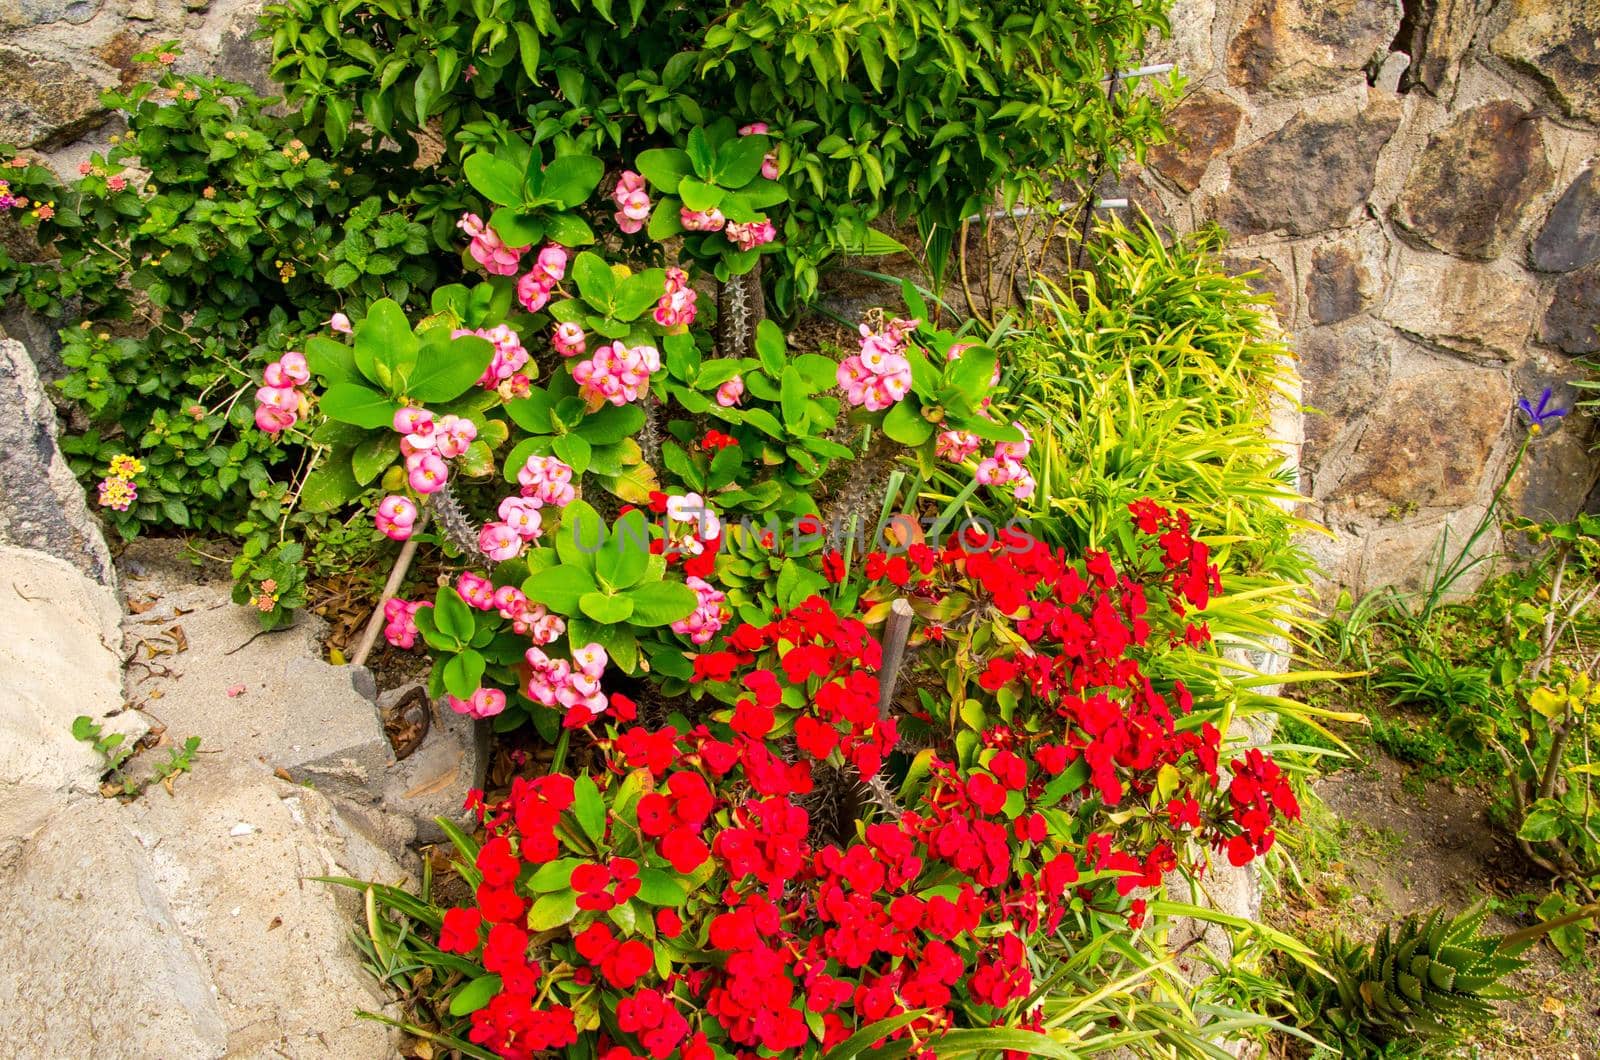 Red and rose small flowers with green leaves and grass on stone wall